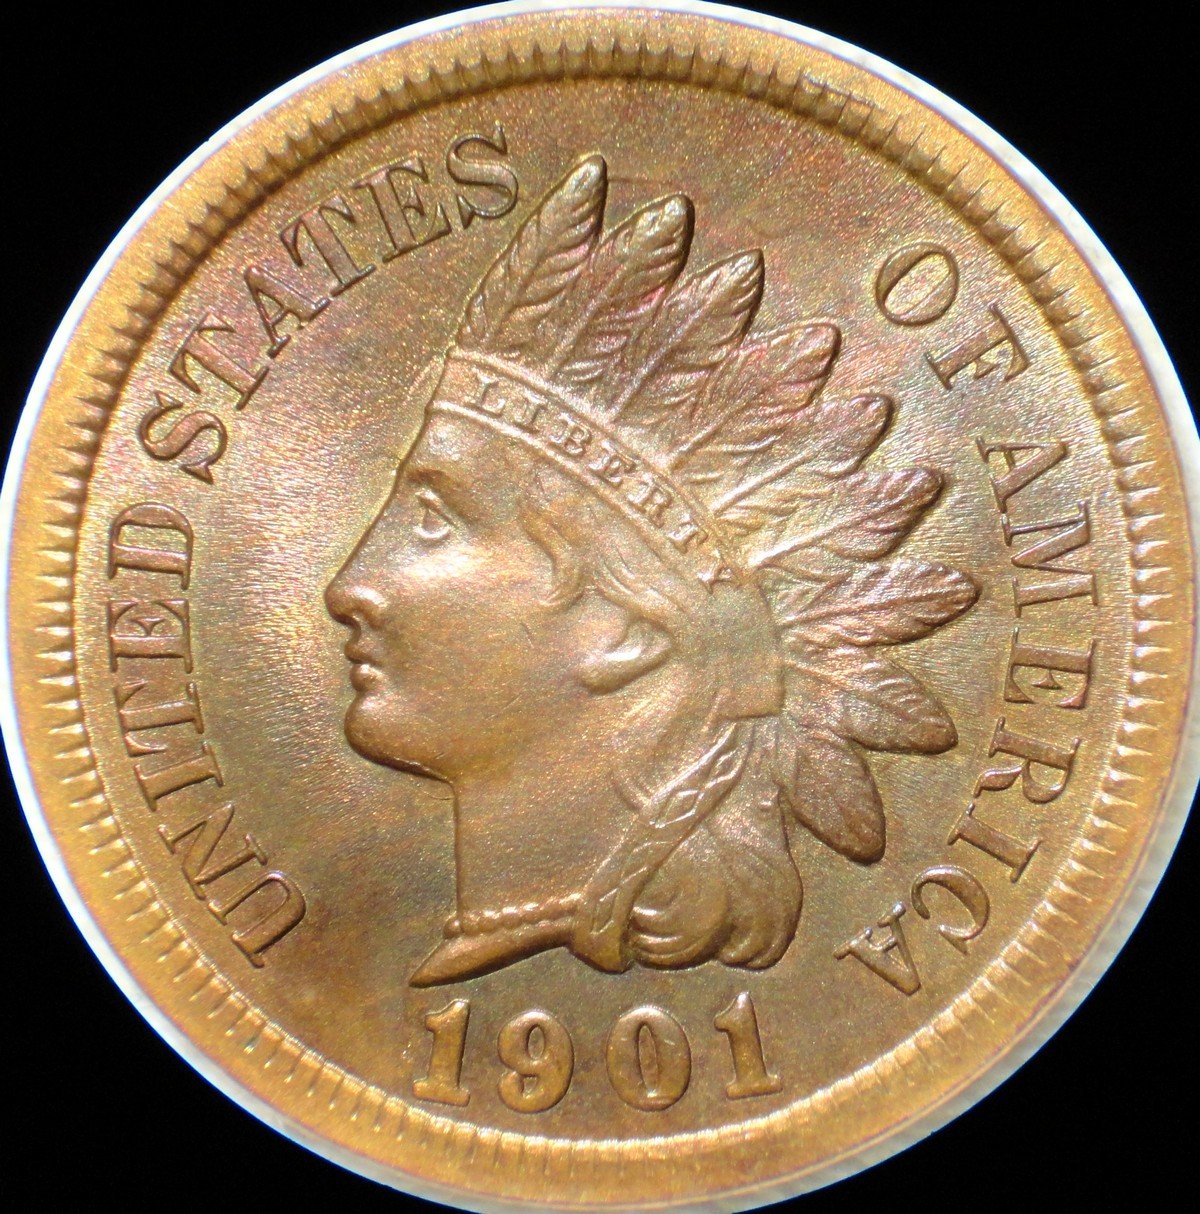 1901 CRK-001 - Indian Head Penny